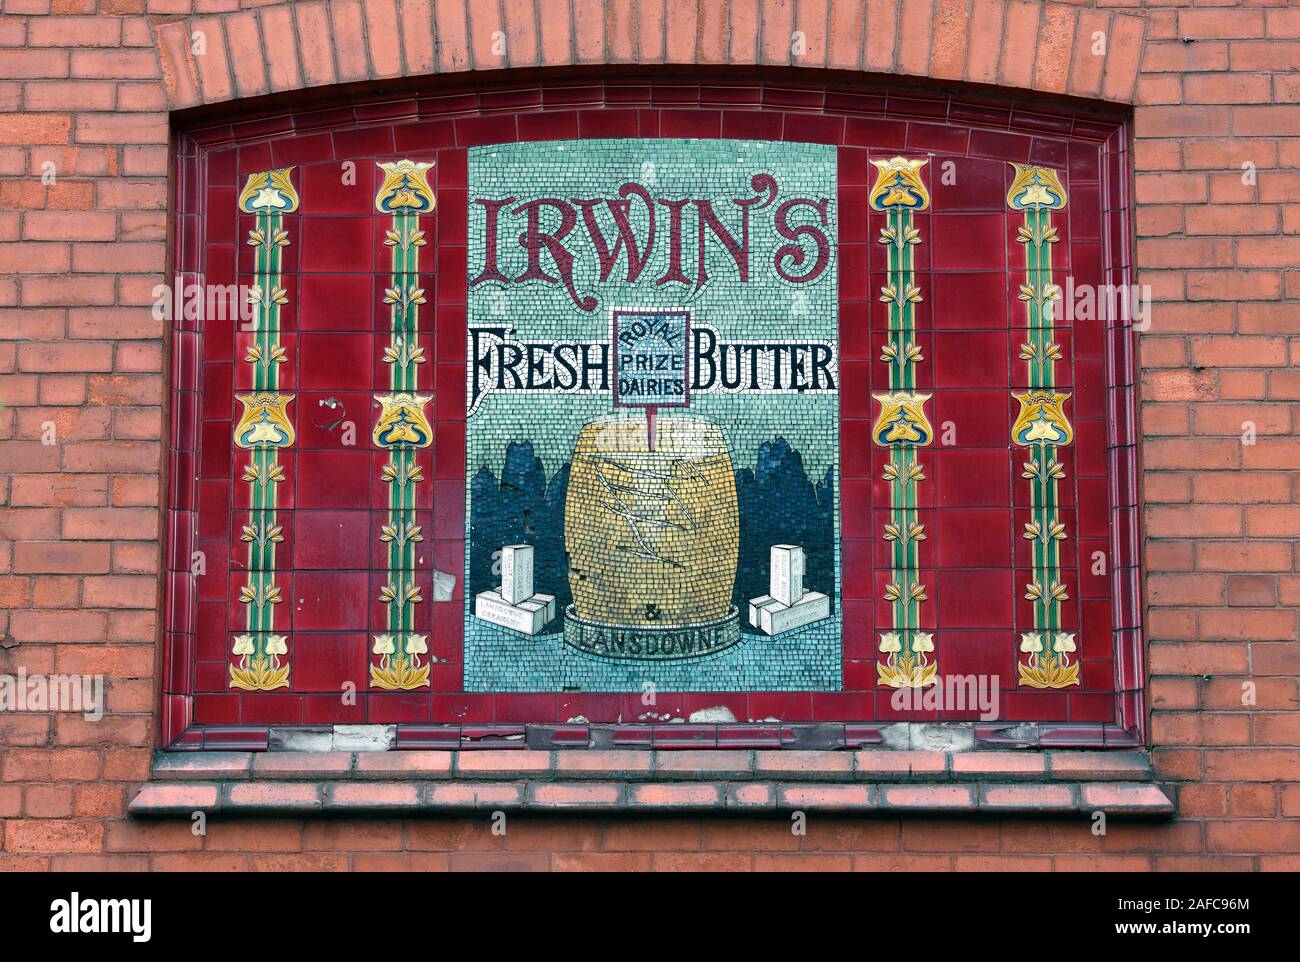 Old advert for Irwin's Fresh Butter, in mosaic and tile (with Art Nouveau touches), on a brick wall, Allerton Road, Liverpool. Stock Photo